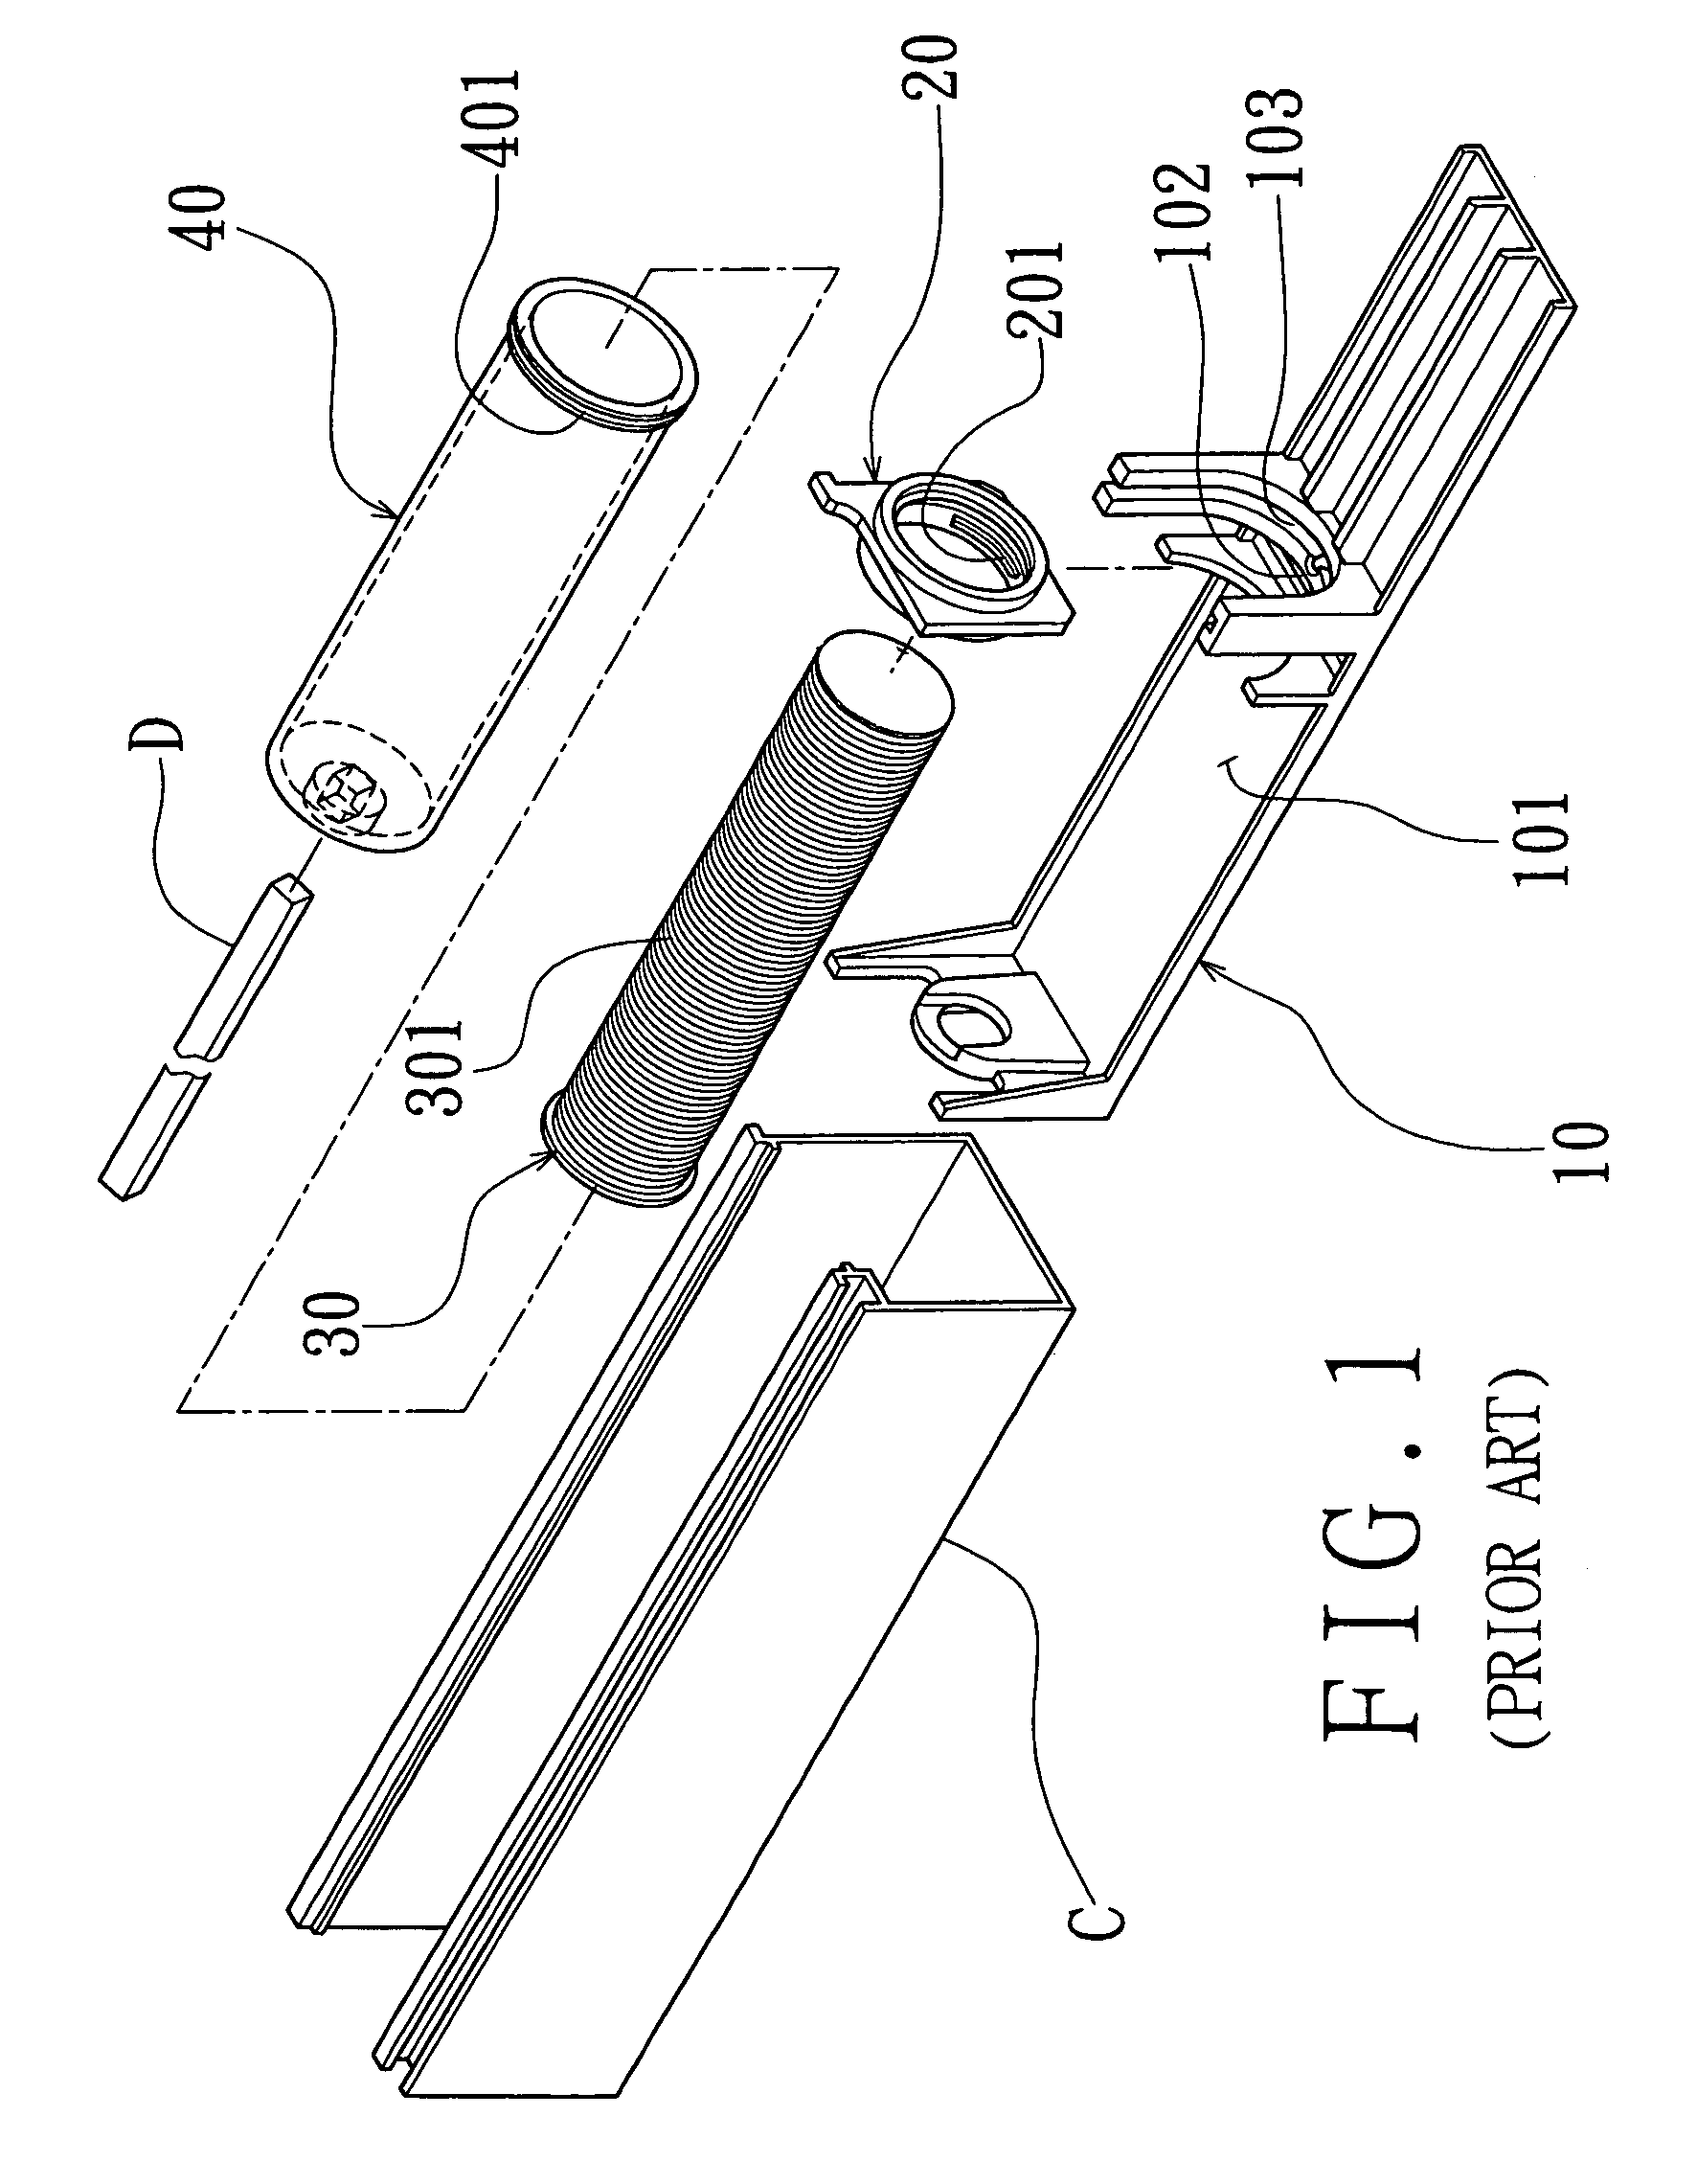 Tilt and lift device for adjusting tilt angle and height of slats of a Venetian blind